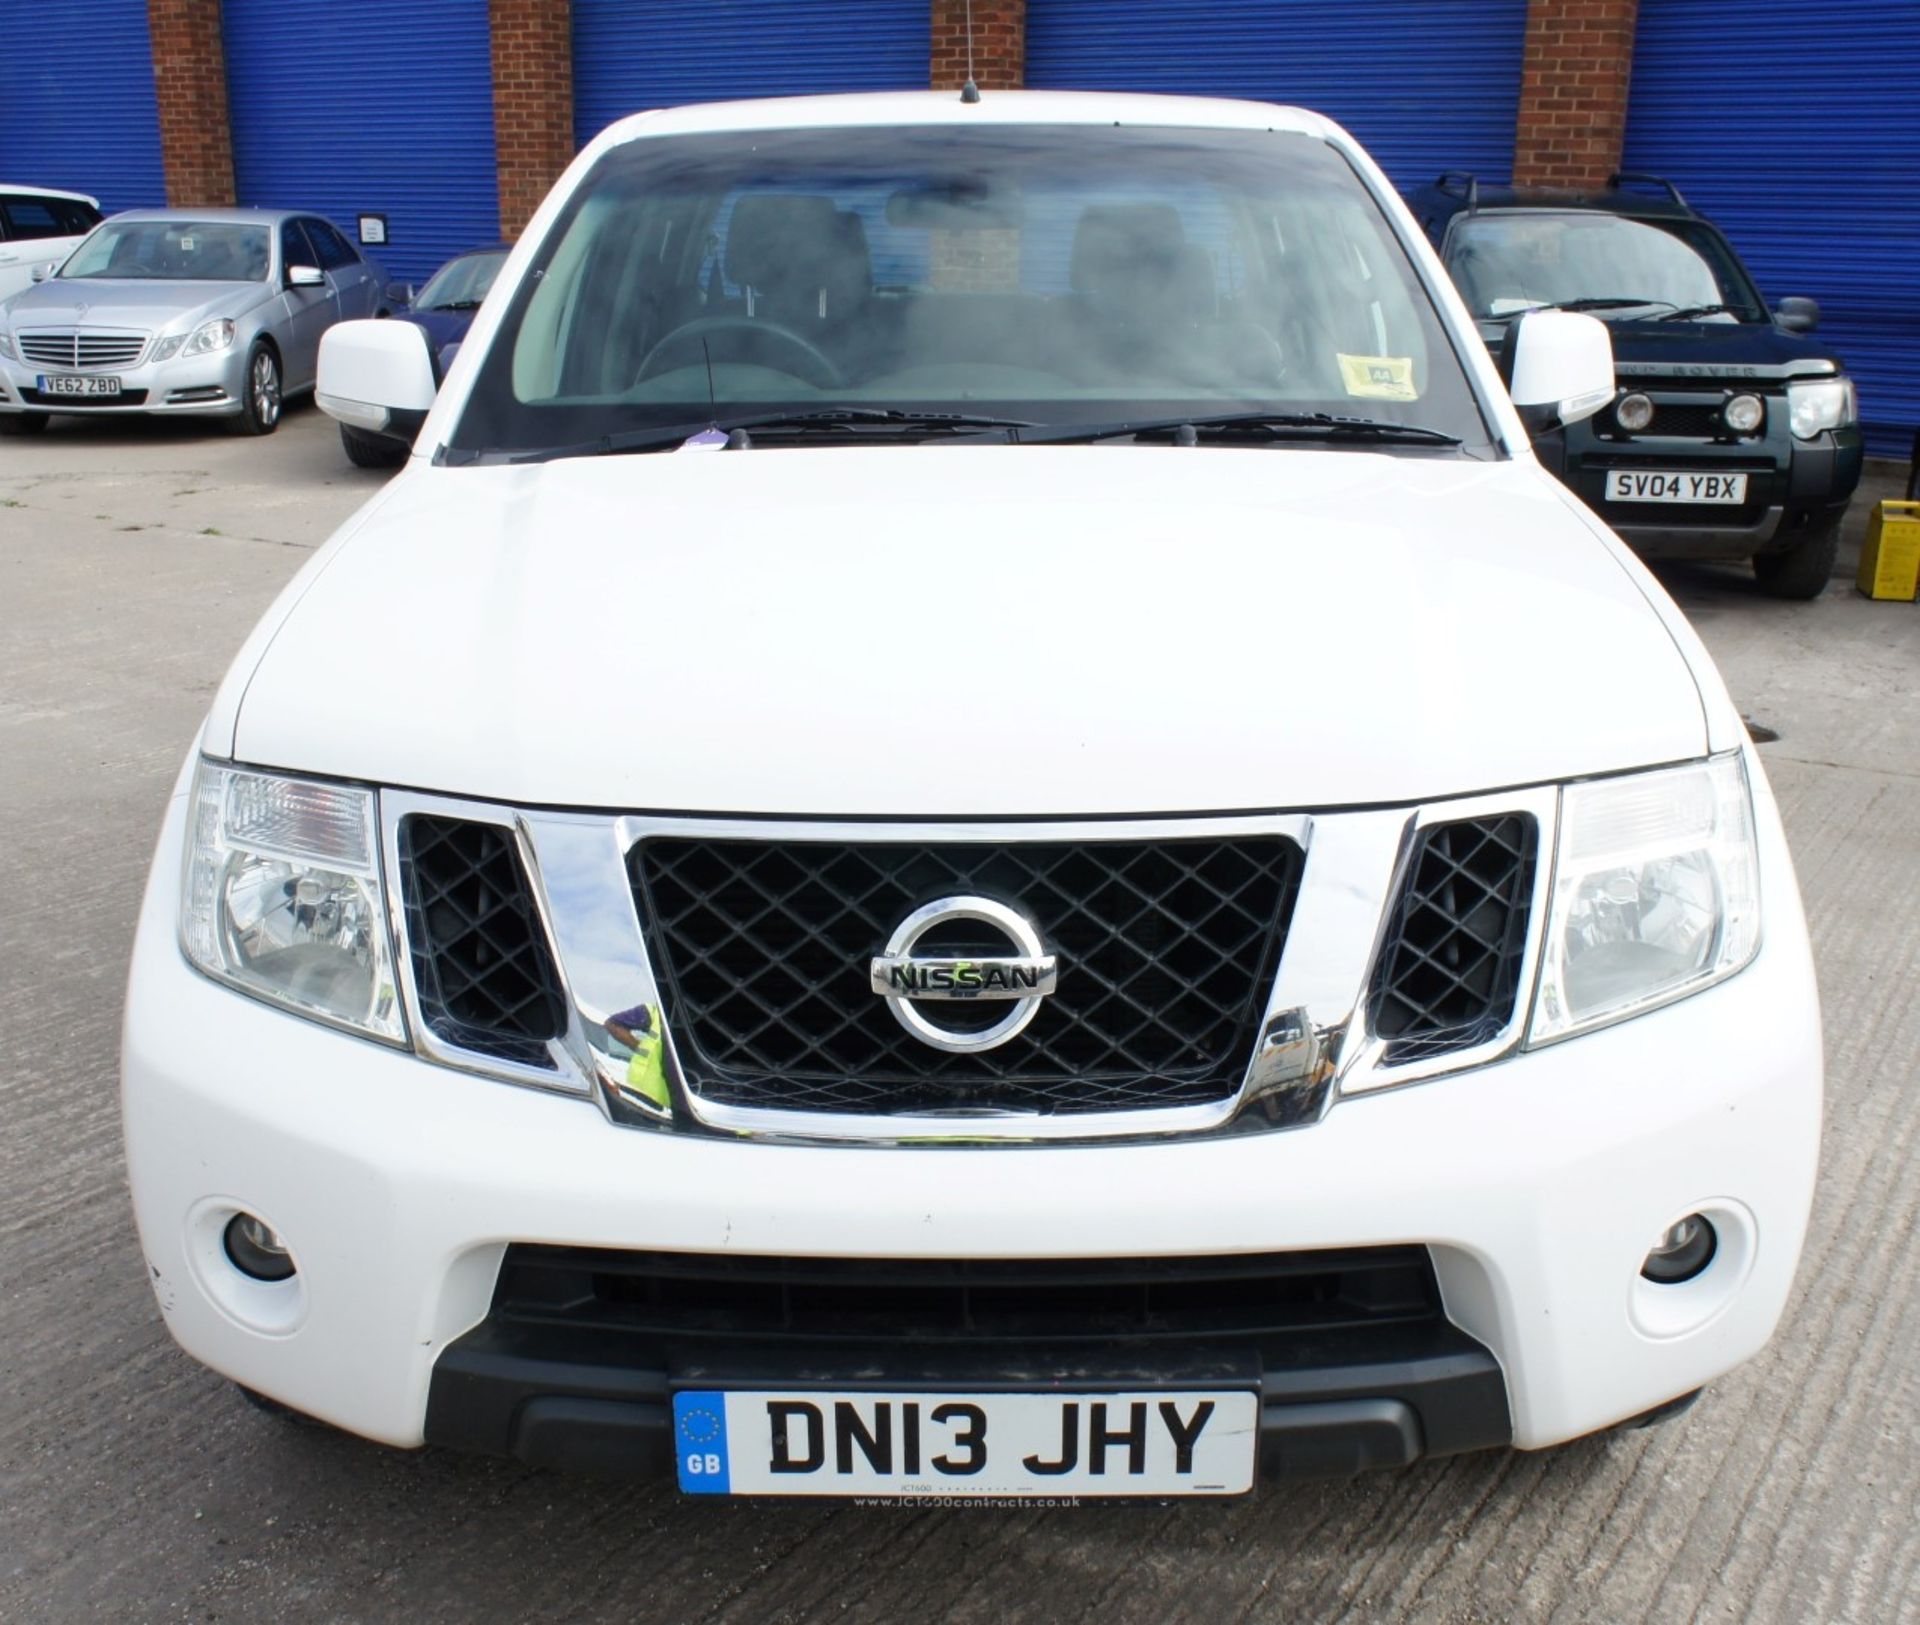 * Nissan Navara Acenta 2.5dCi 190 4WD Double Cab Pick Up, diesel, 2488cc, white, Registration DN13 - Image 2 of 16